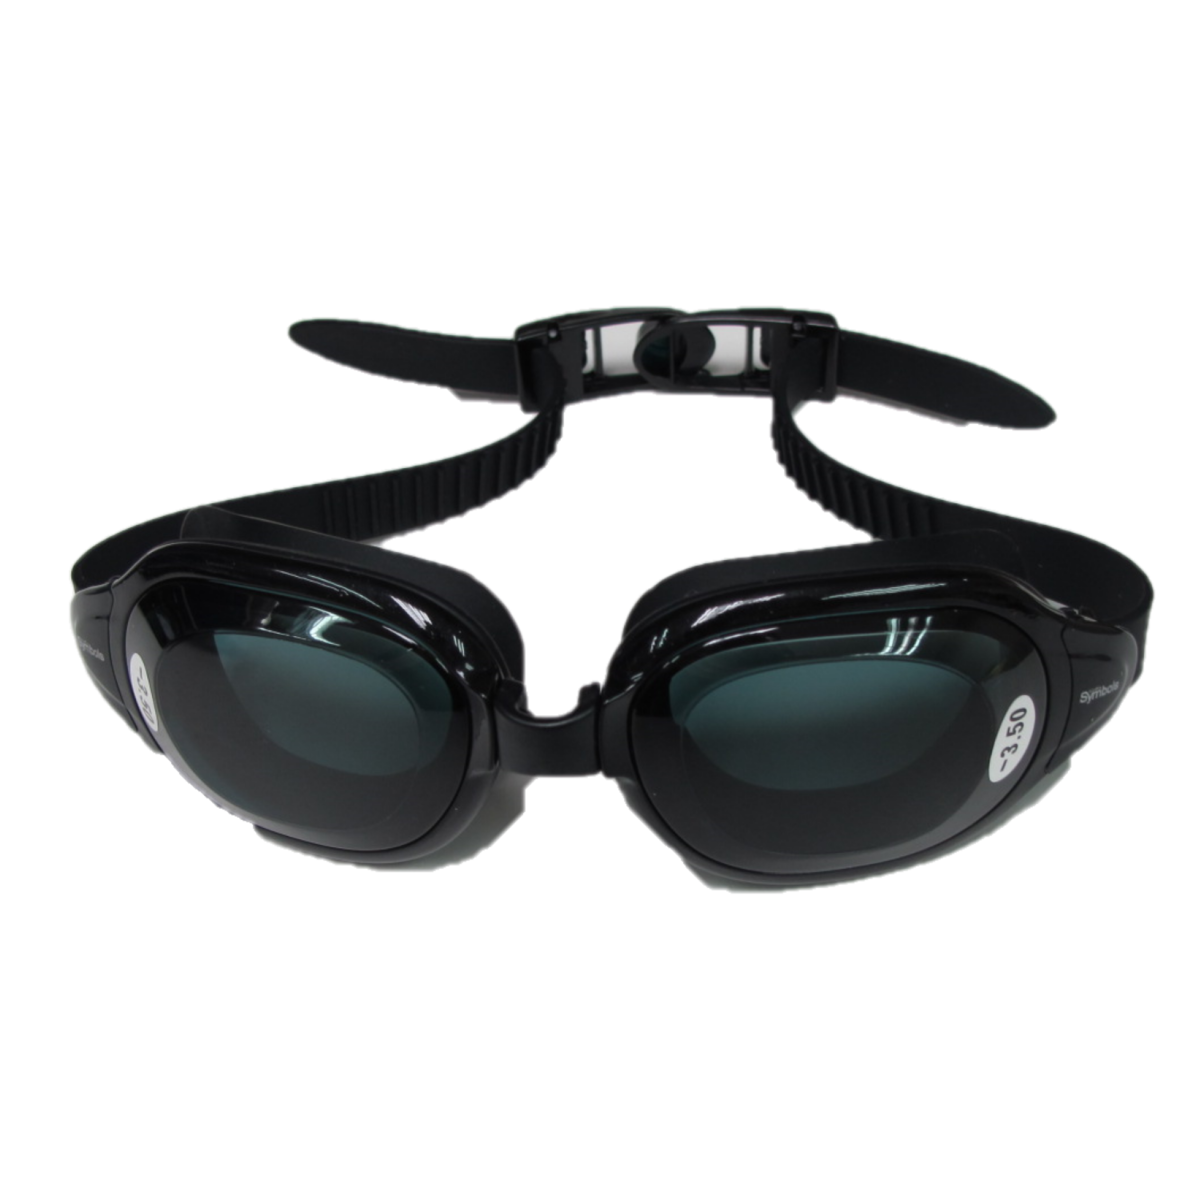 [MS-8700-OPT] High Quality Silicone UV Protection Anti-Fog Black Optical Swimming Goggles